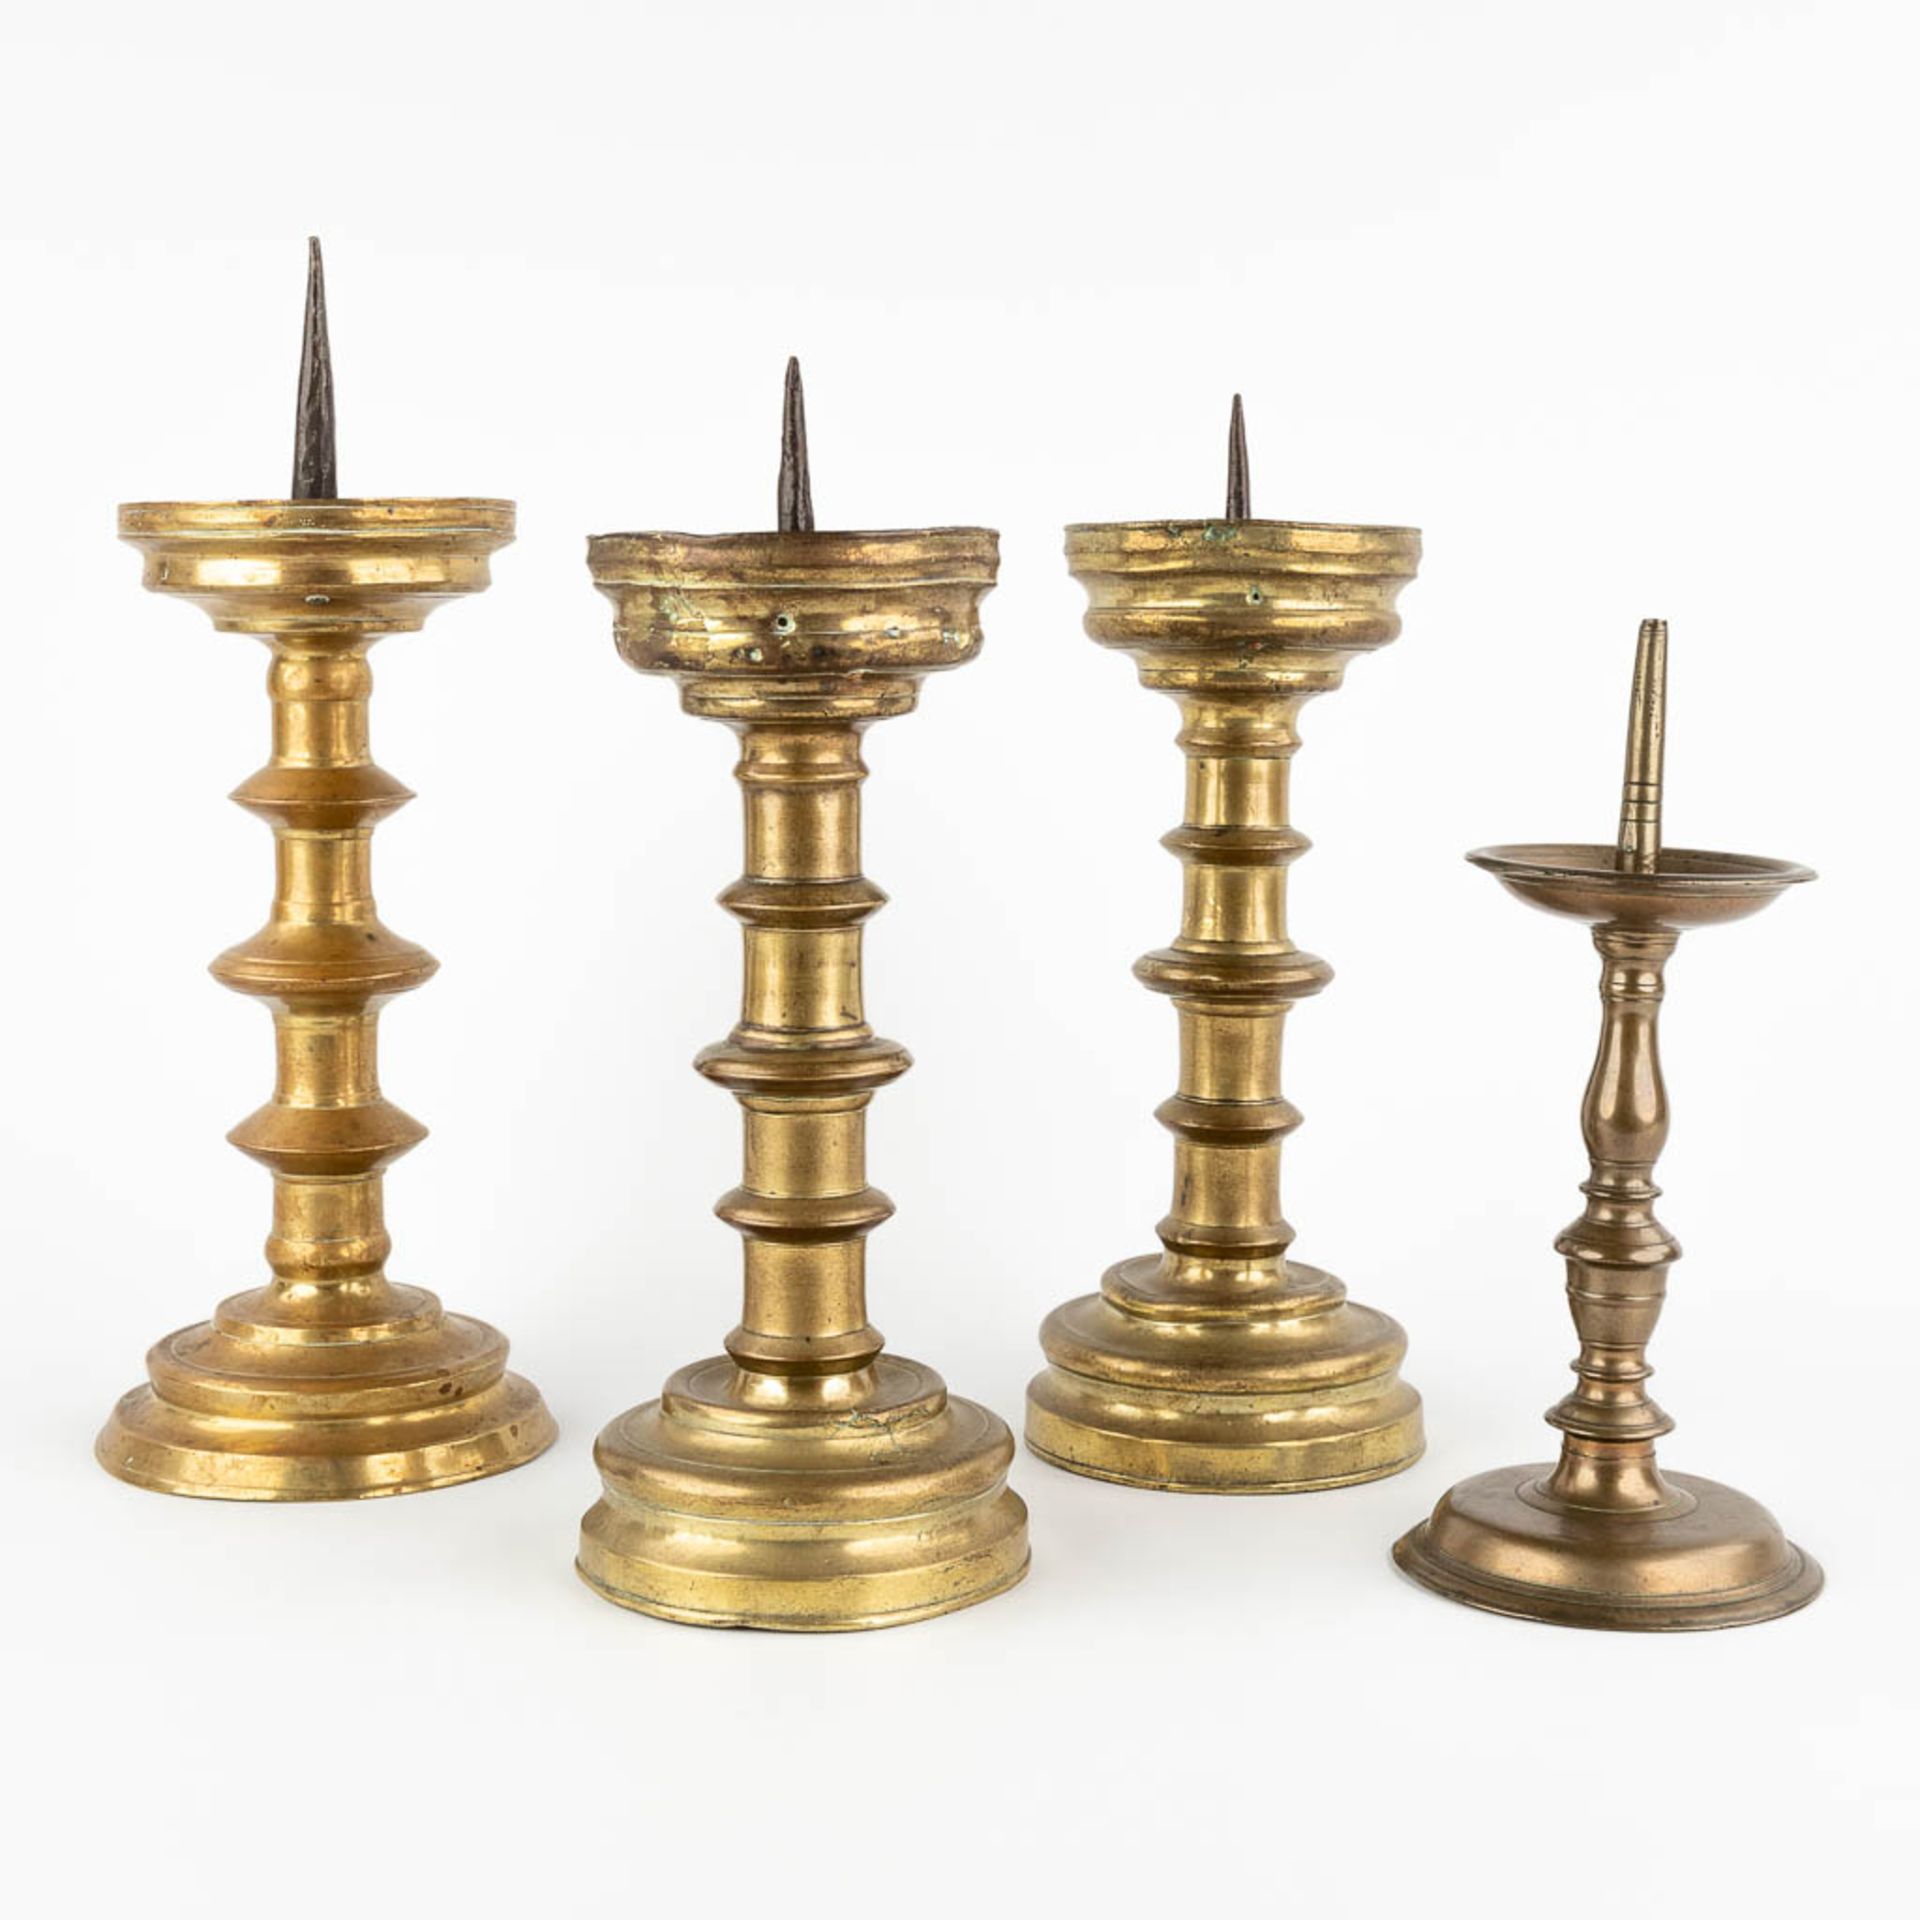 Four candlesticks, bronze, France and Germany, 17th-18th C. (H:36 x D:14 cm)